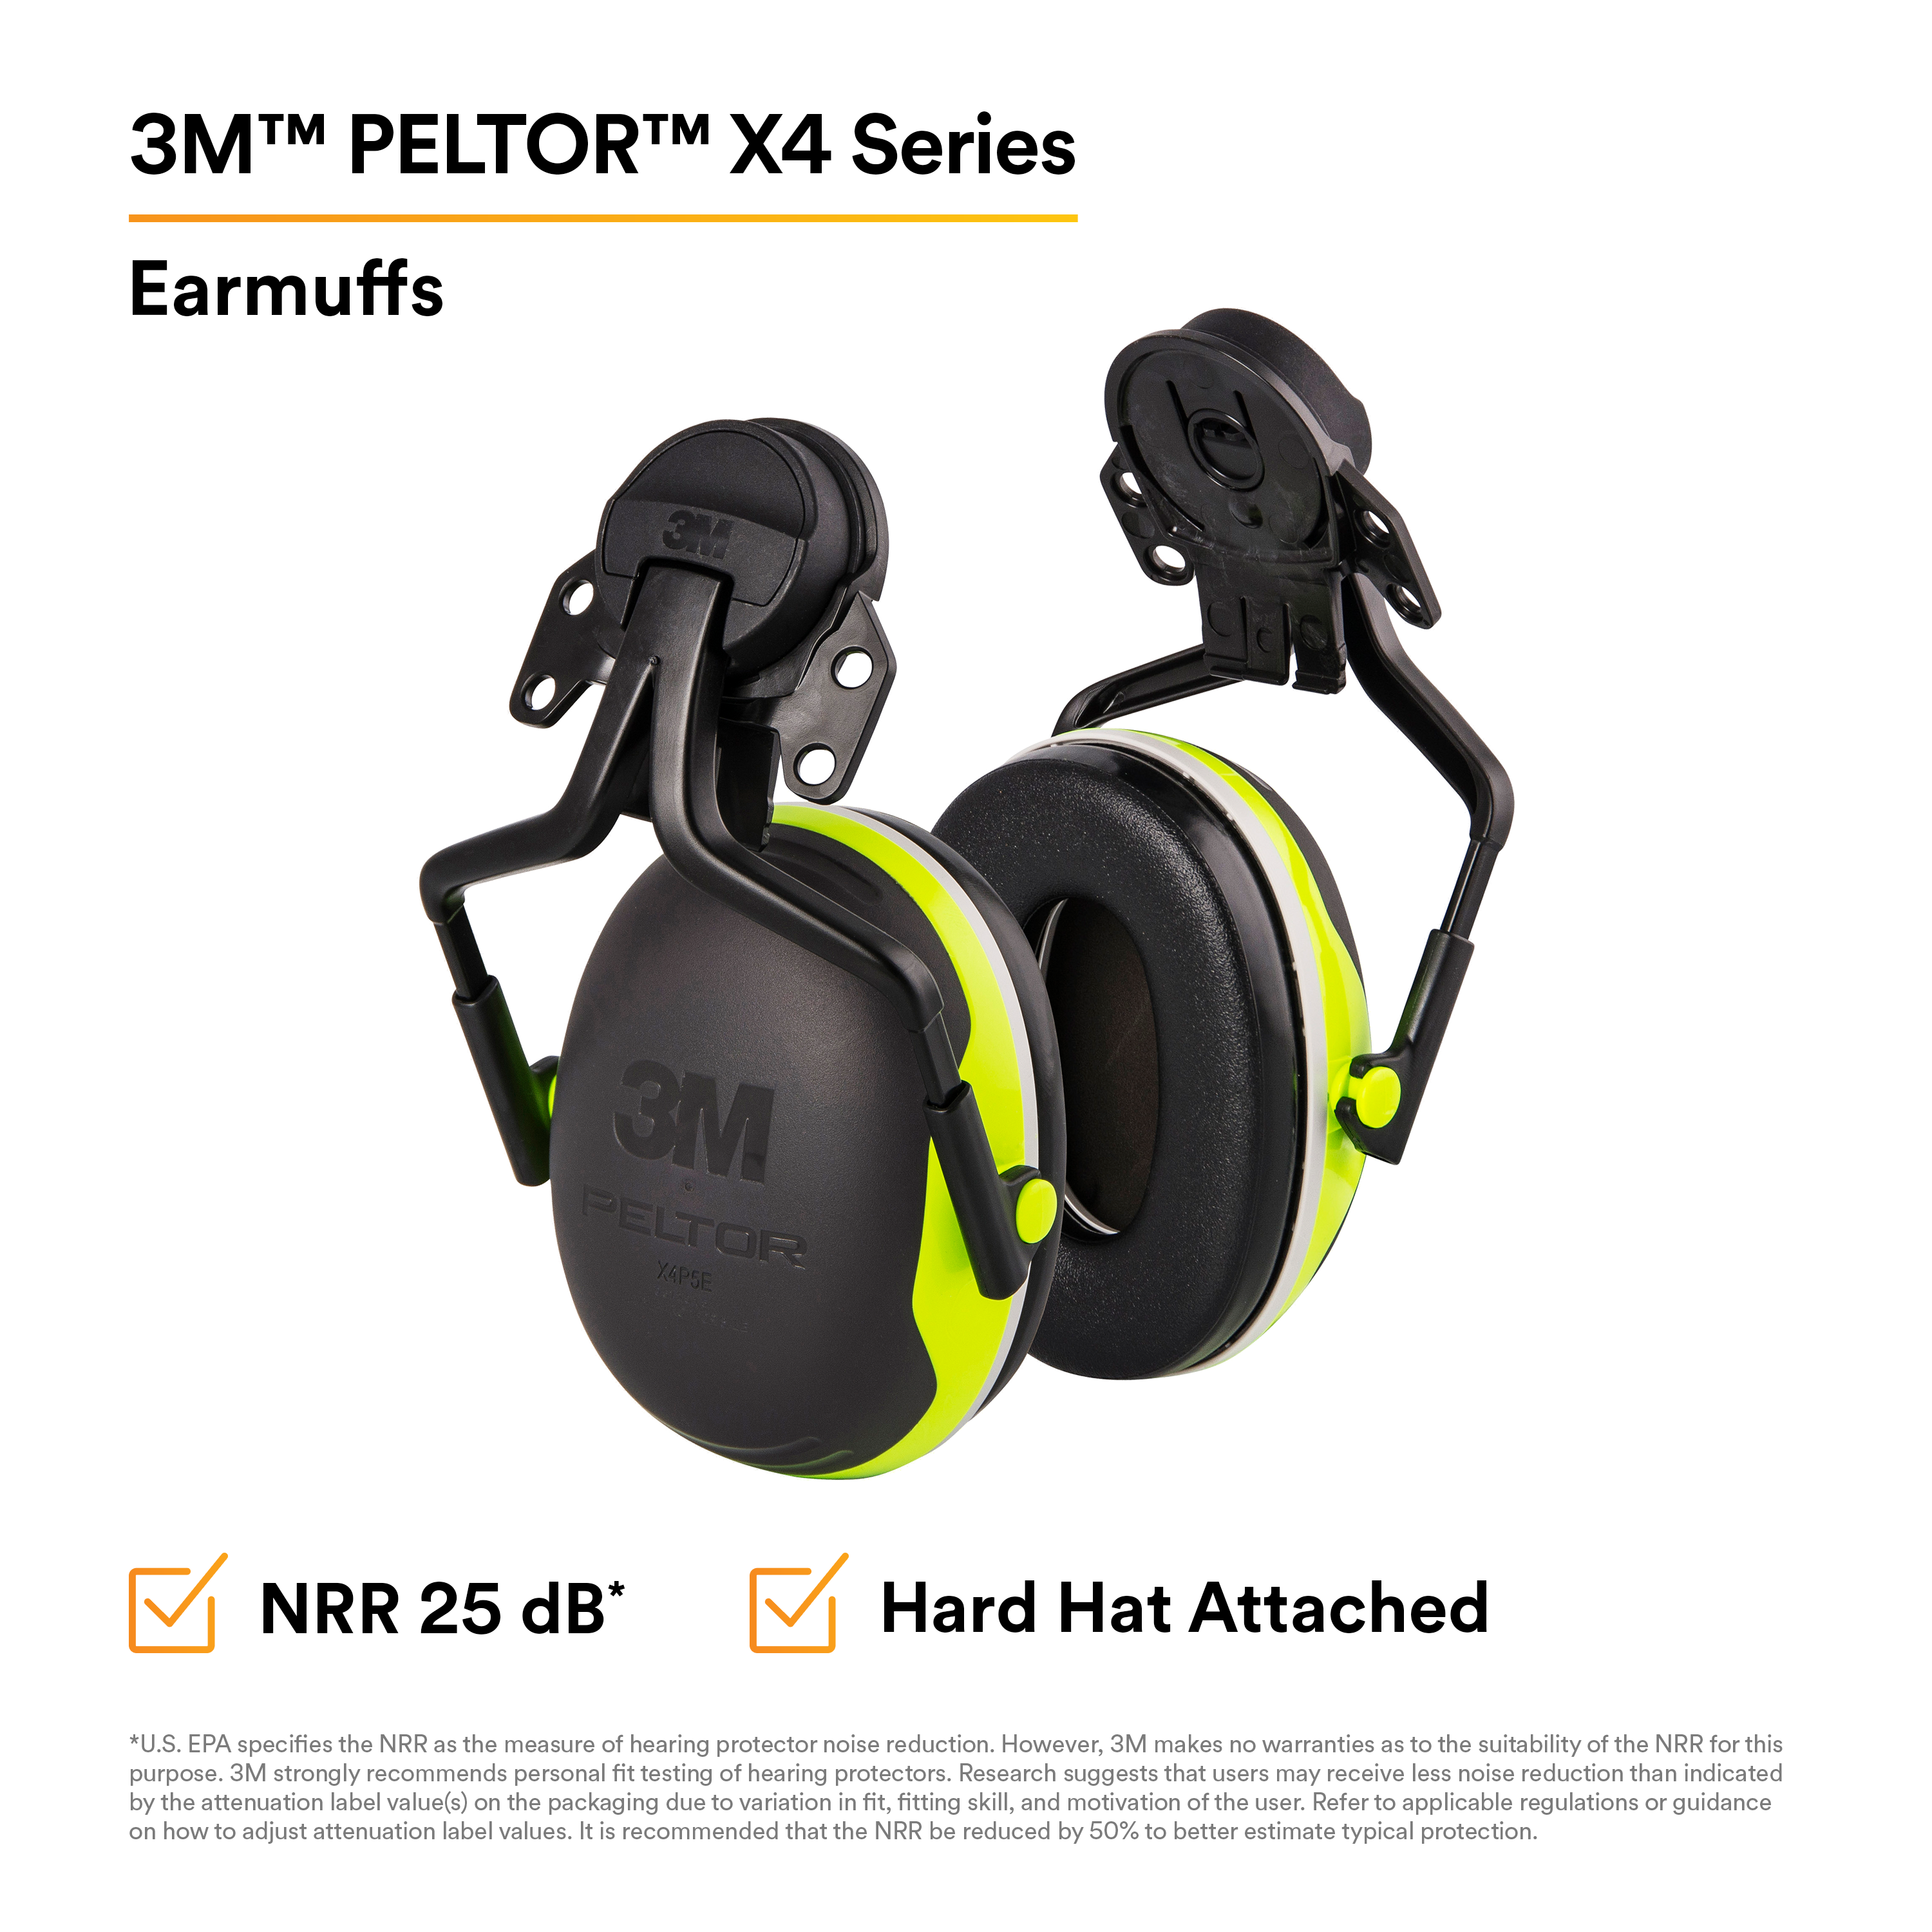 3M™ PELTOR™ Hard Hat Attached Electrically Insulated Earmuffs X4P5E, 10_2